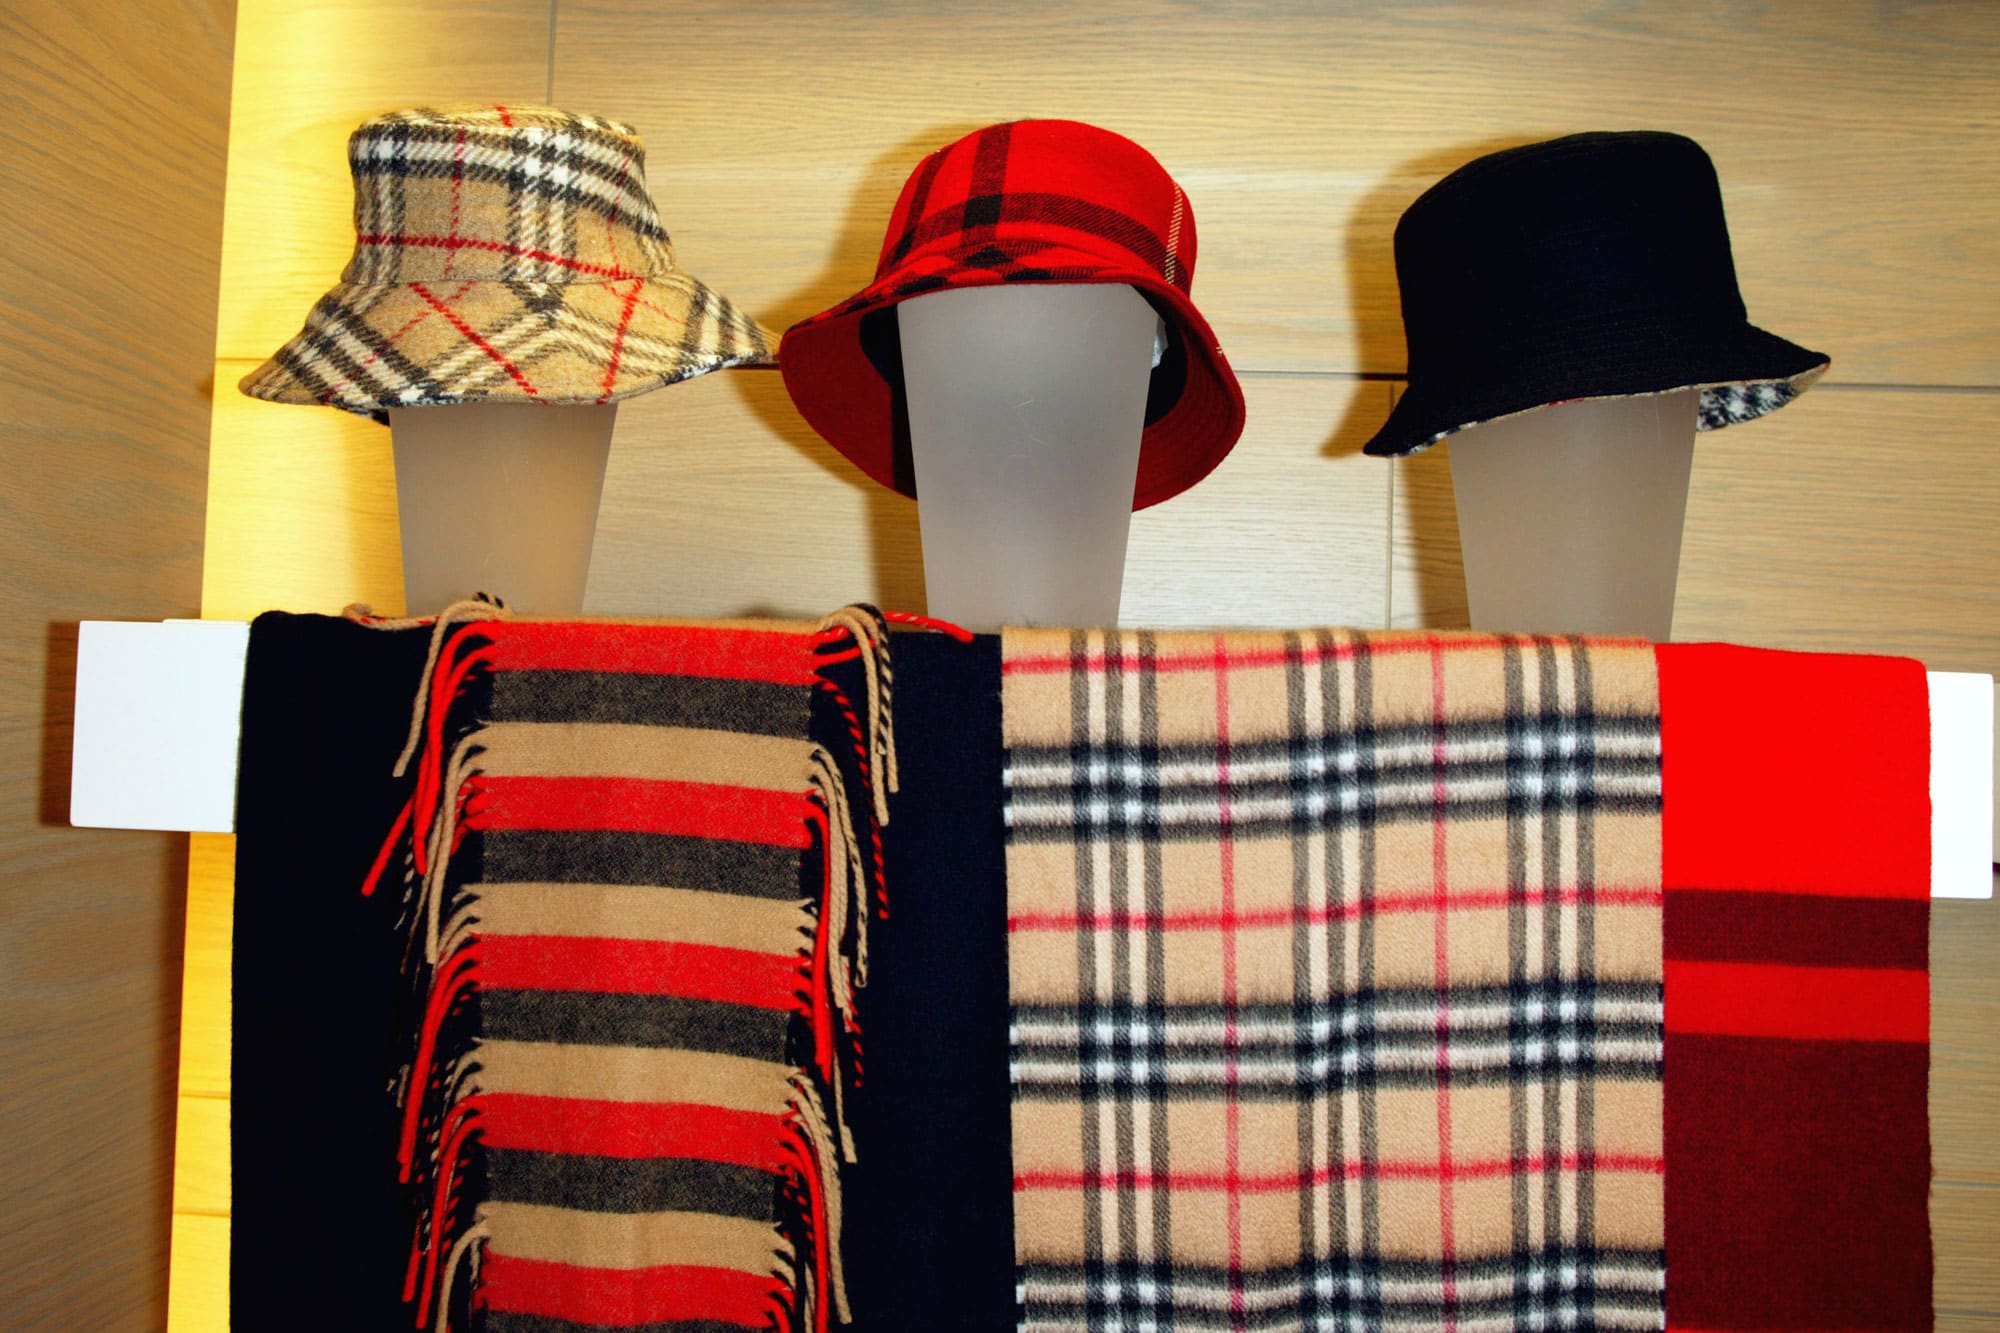 Burberry sues Target for allegedly counterfeiting its check pattern